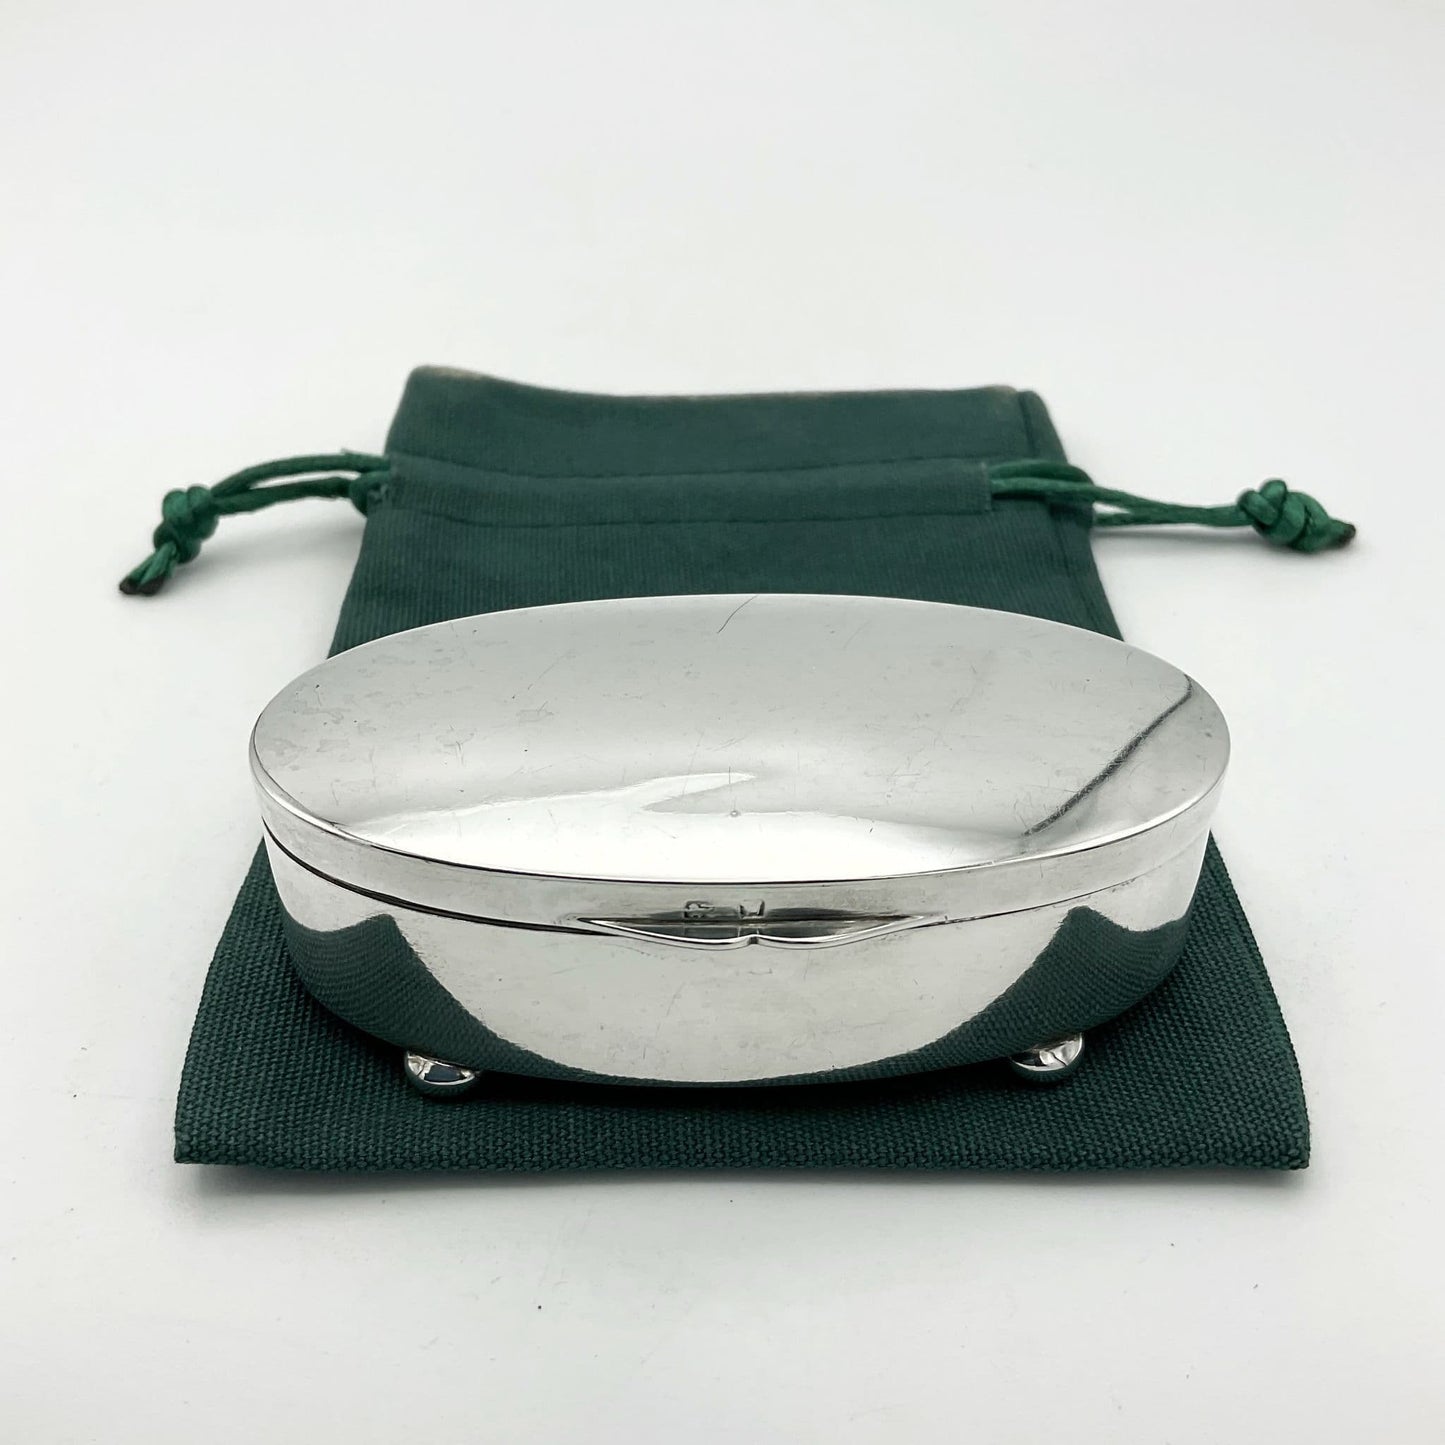 Shiny silver jewellery box sitting on a green cotton bag